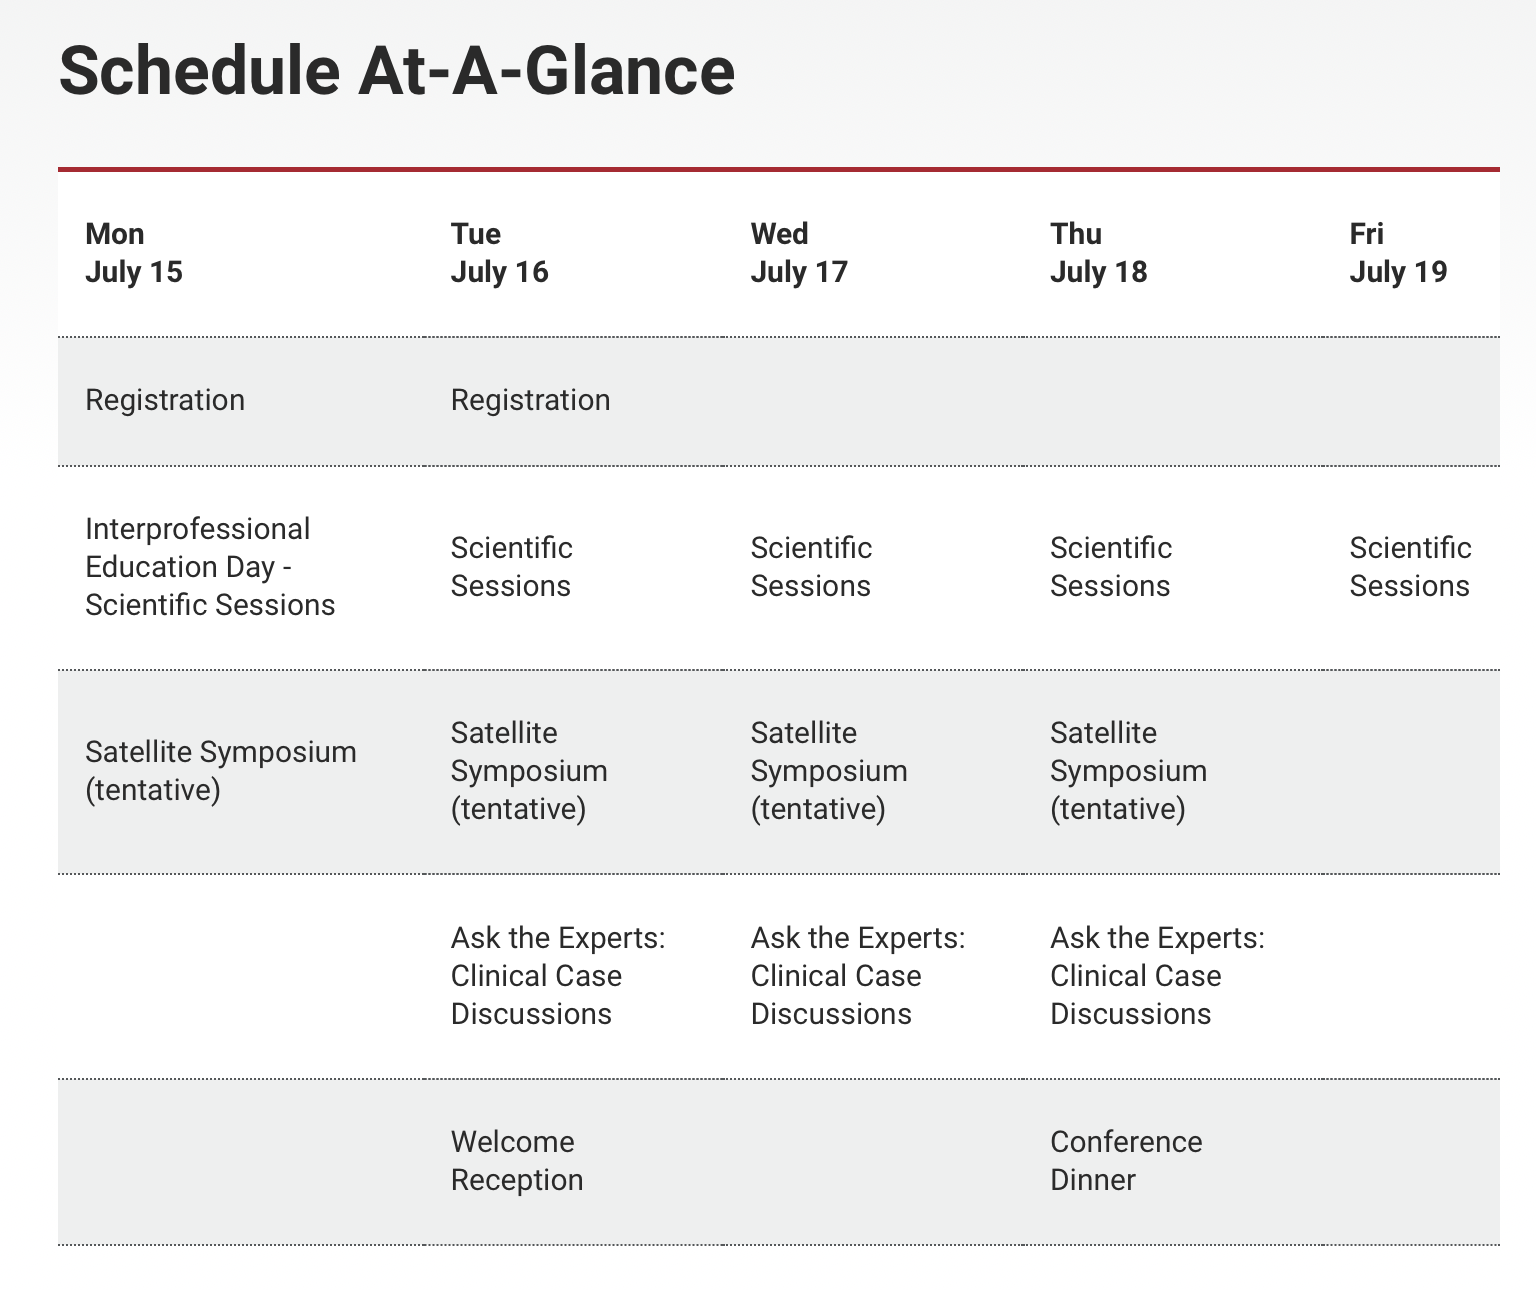 schedule-at-a-glance.png